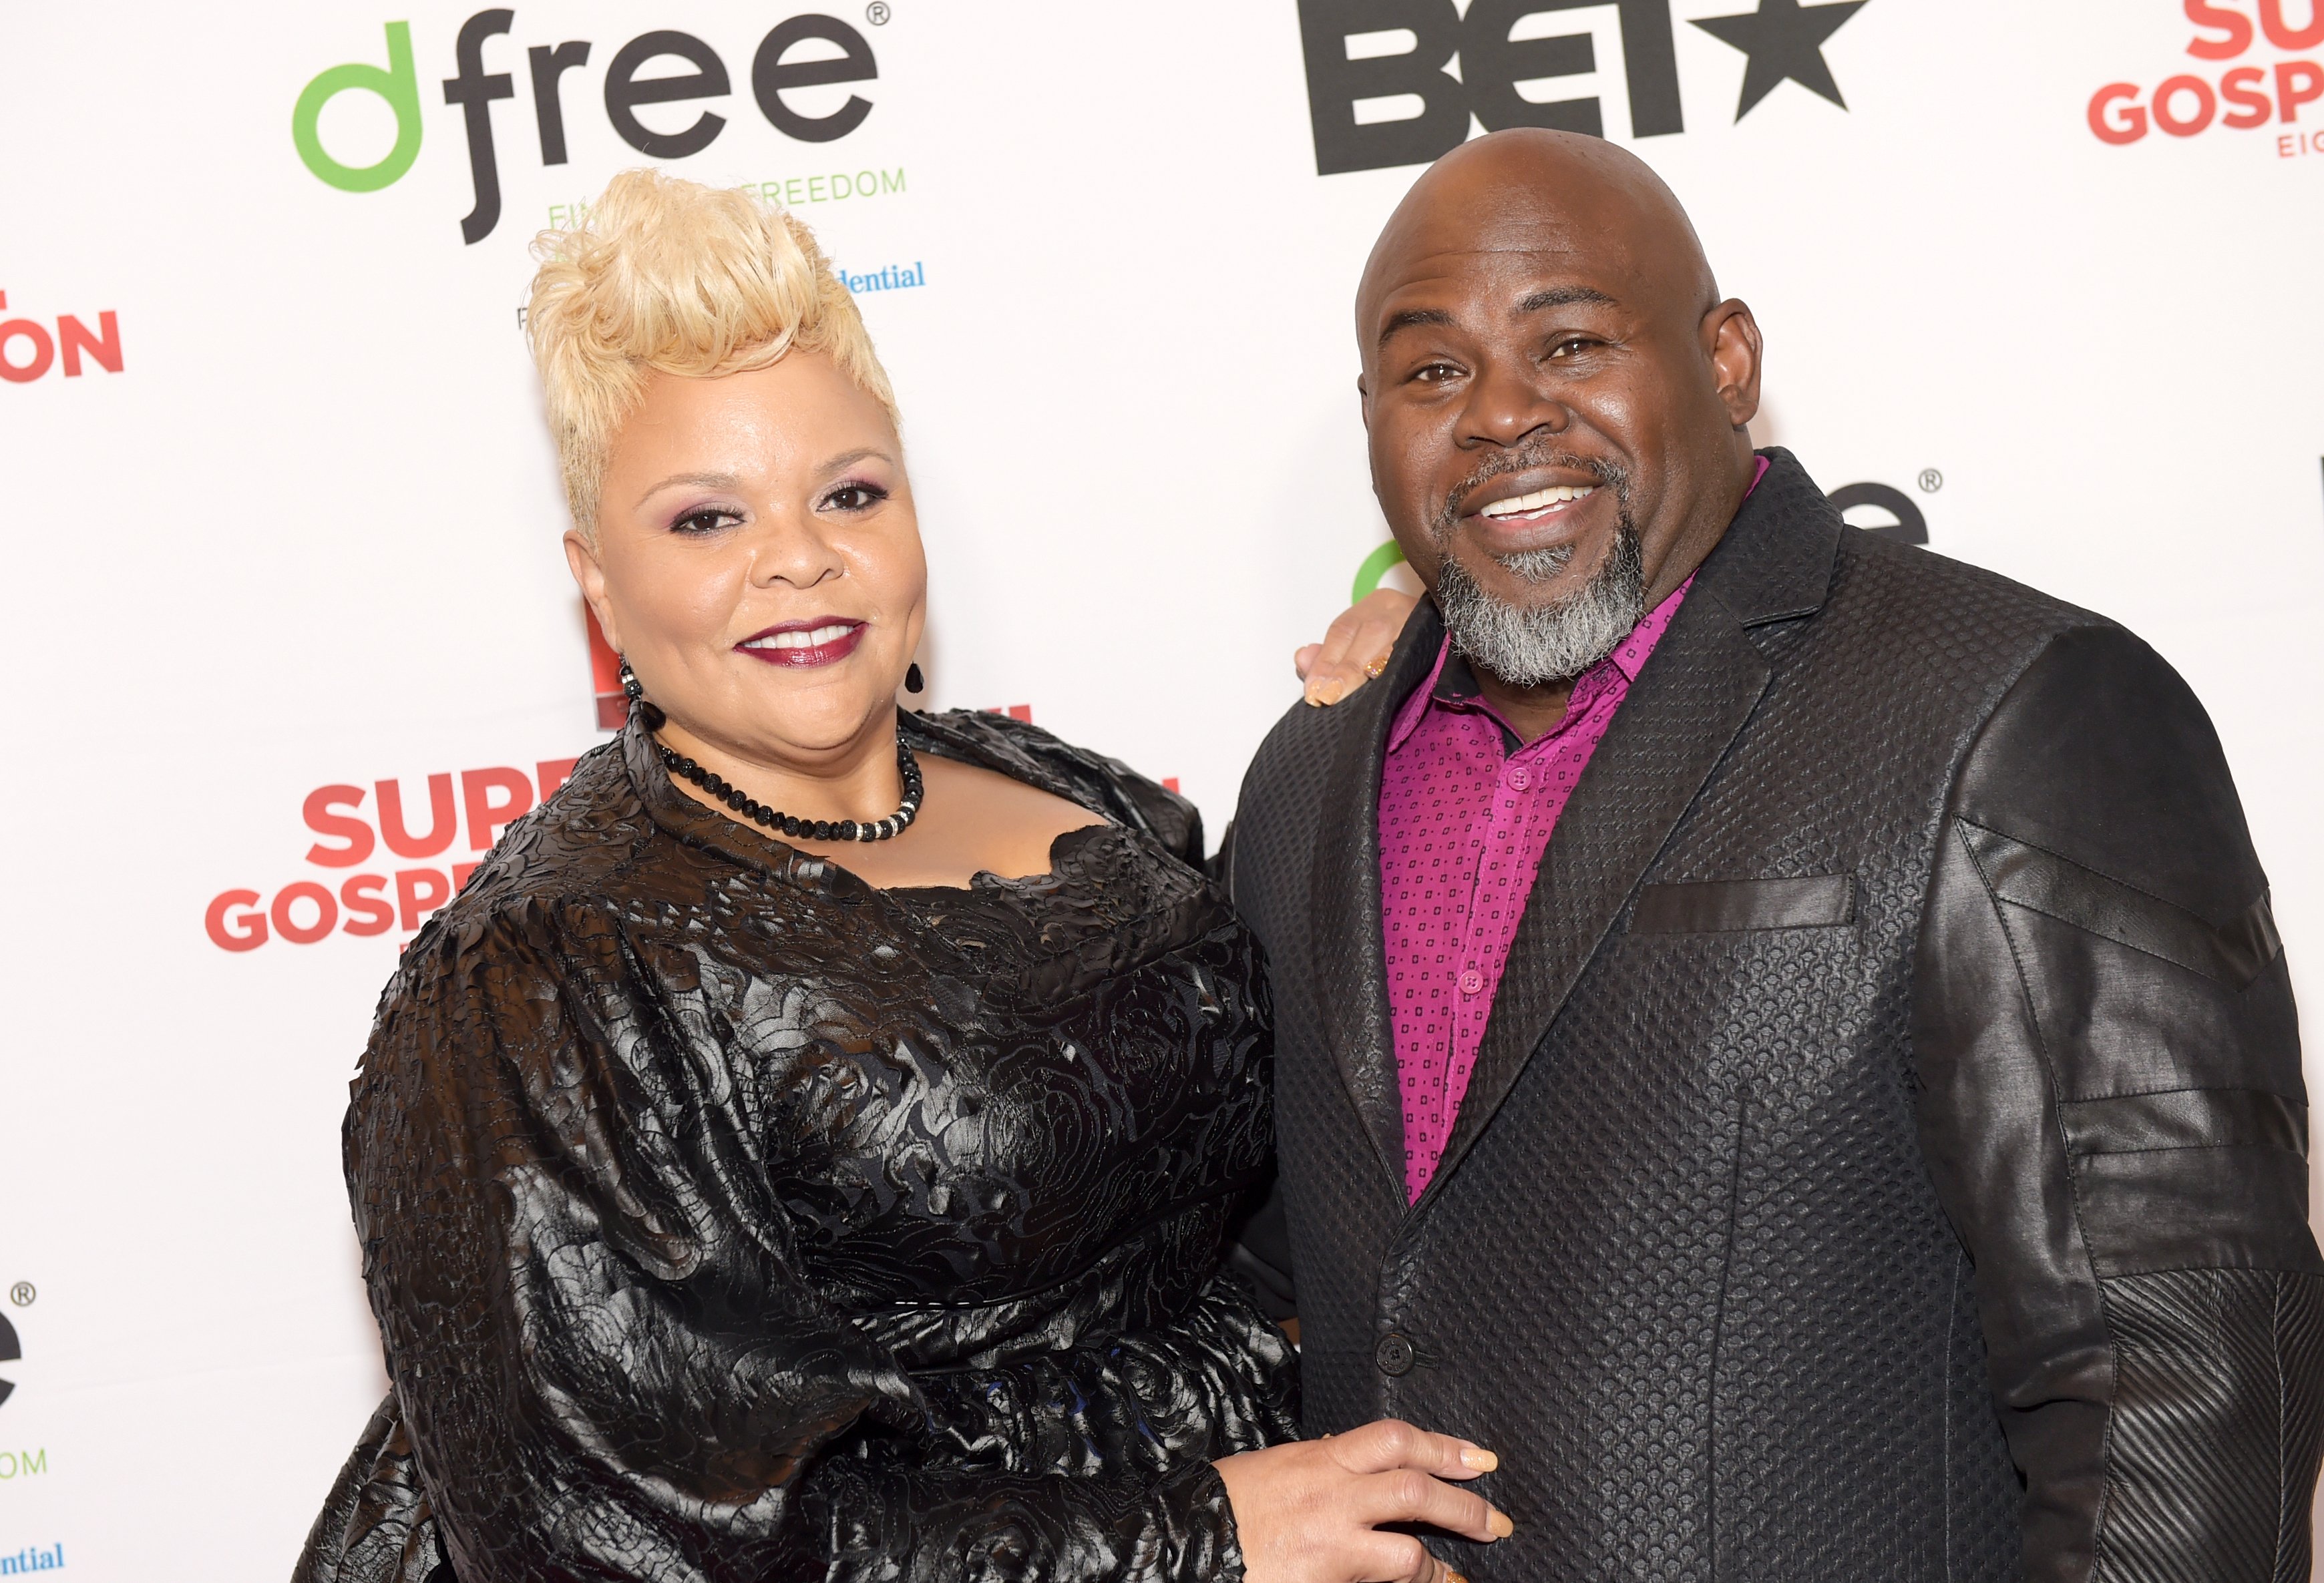  Tamela Mann and David Mann attend the BET Presents Super Bowl Gospel Celebration at Lakewood Church on February 3, 2017. | Photo: Getty Images